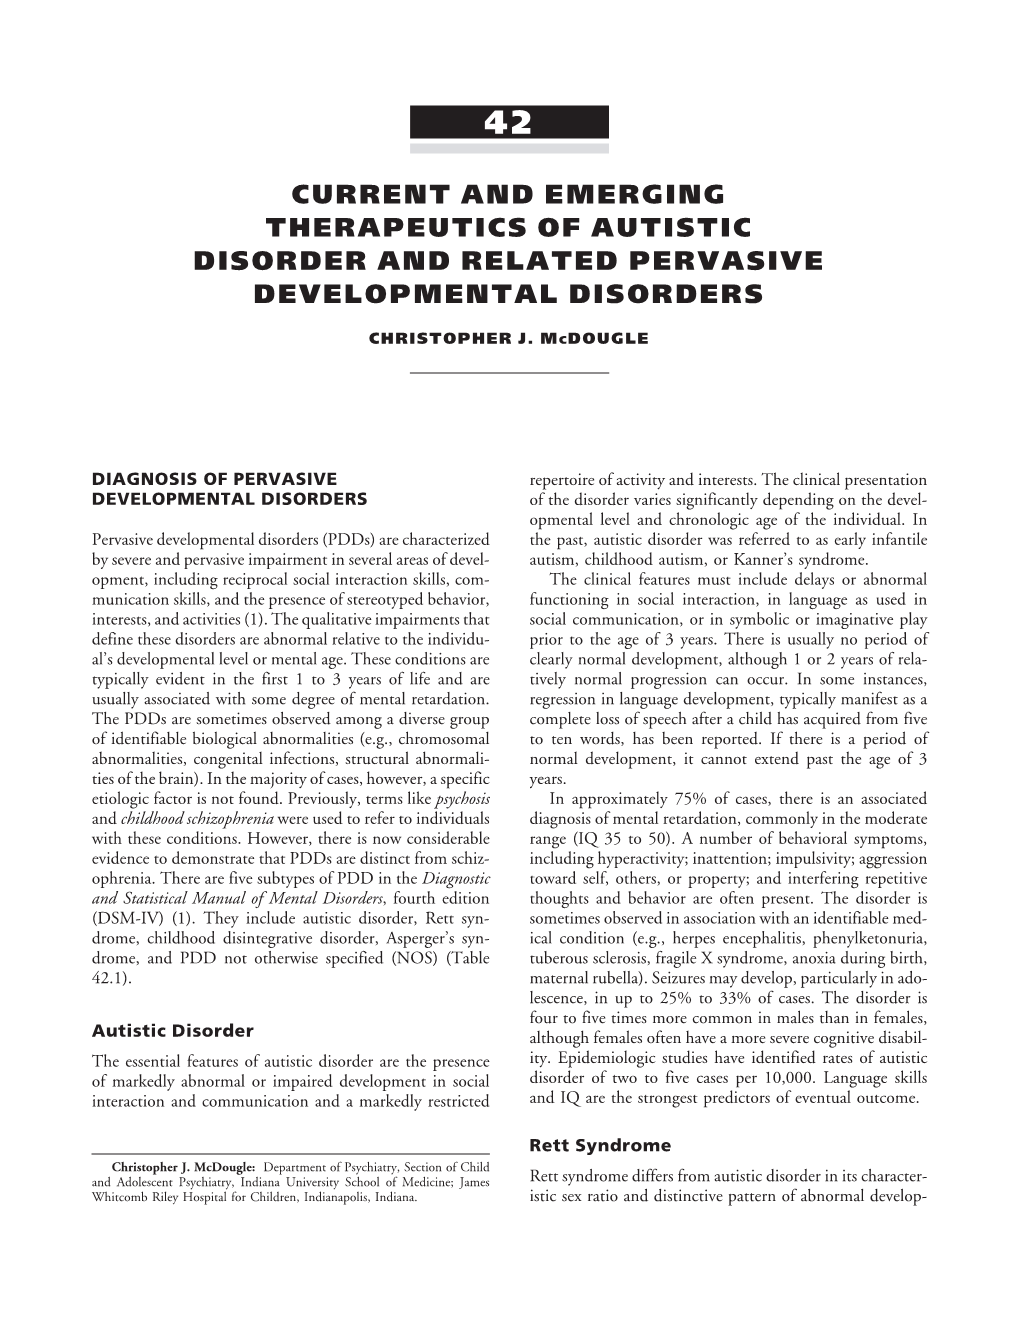 Current and Emerging Therapeutics of Autistic Disorder and Related Pervasive Developmental Disorders